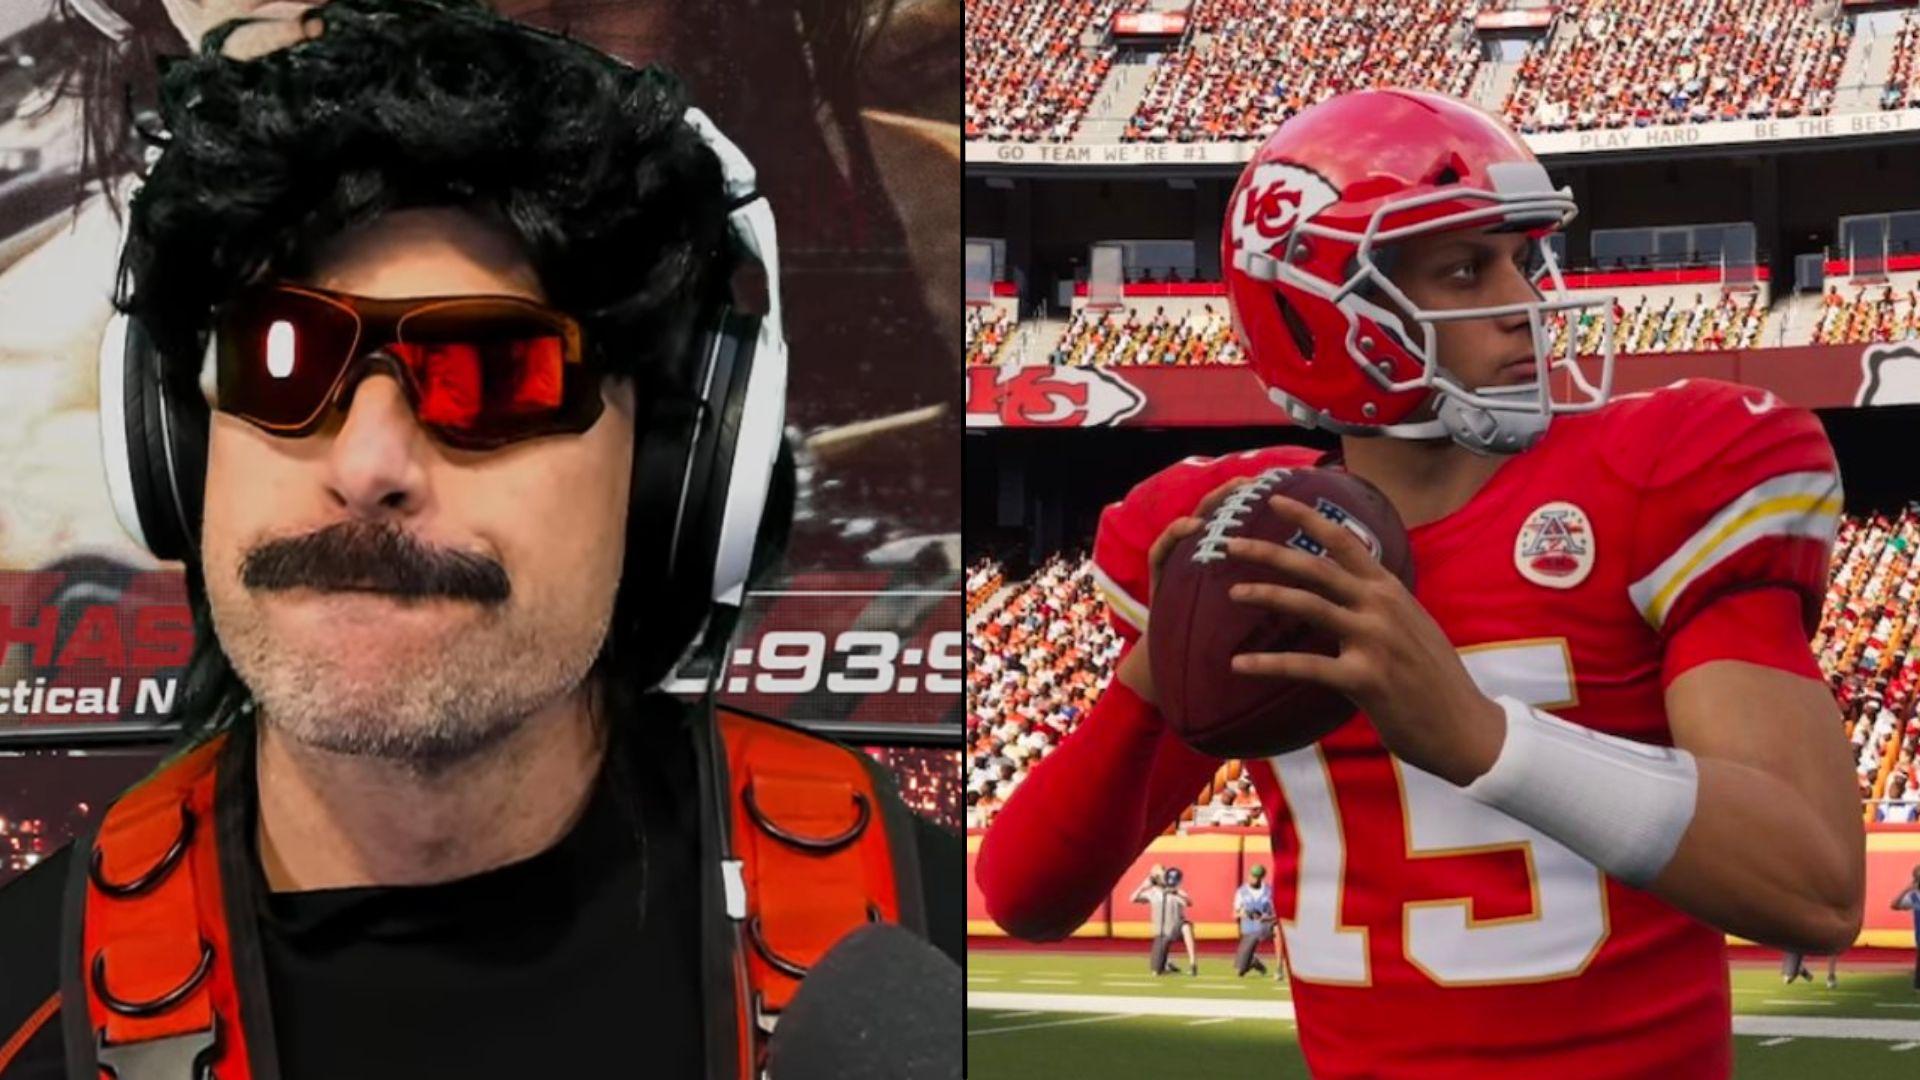 Dr Disrespect side-by-side with Patrick Mahomes in Madden 24